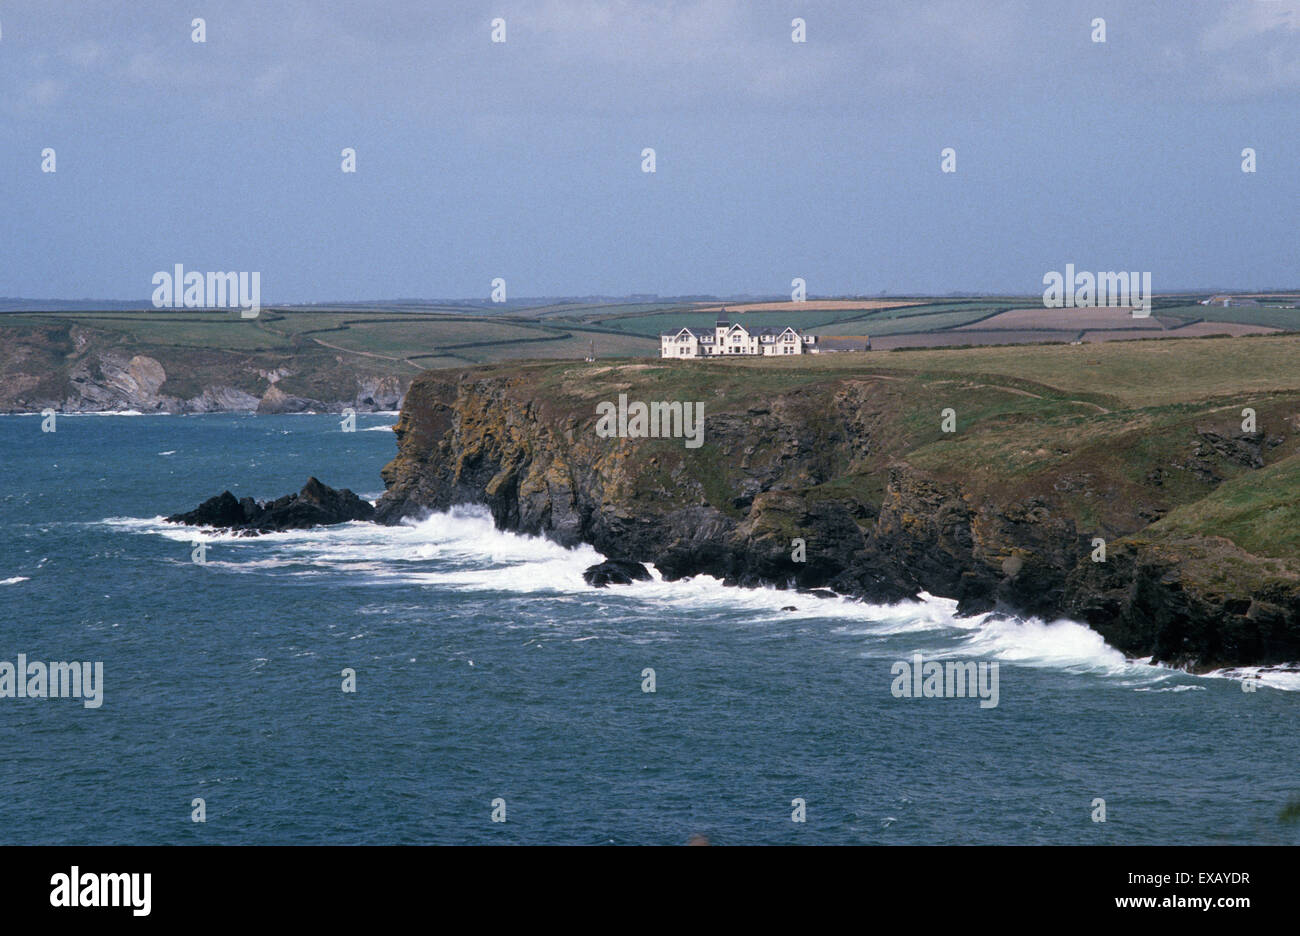 Cornwall, England. Marconi Point above Poldhu Cove with the Poldhu Hotel (now a nursing home) and the Marconi Monument. Stock Photo